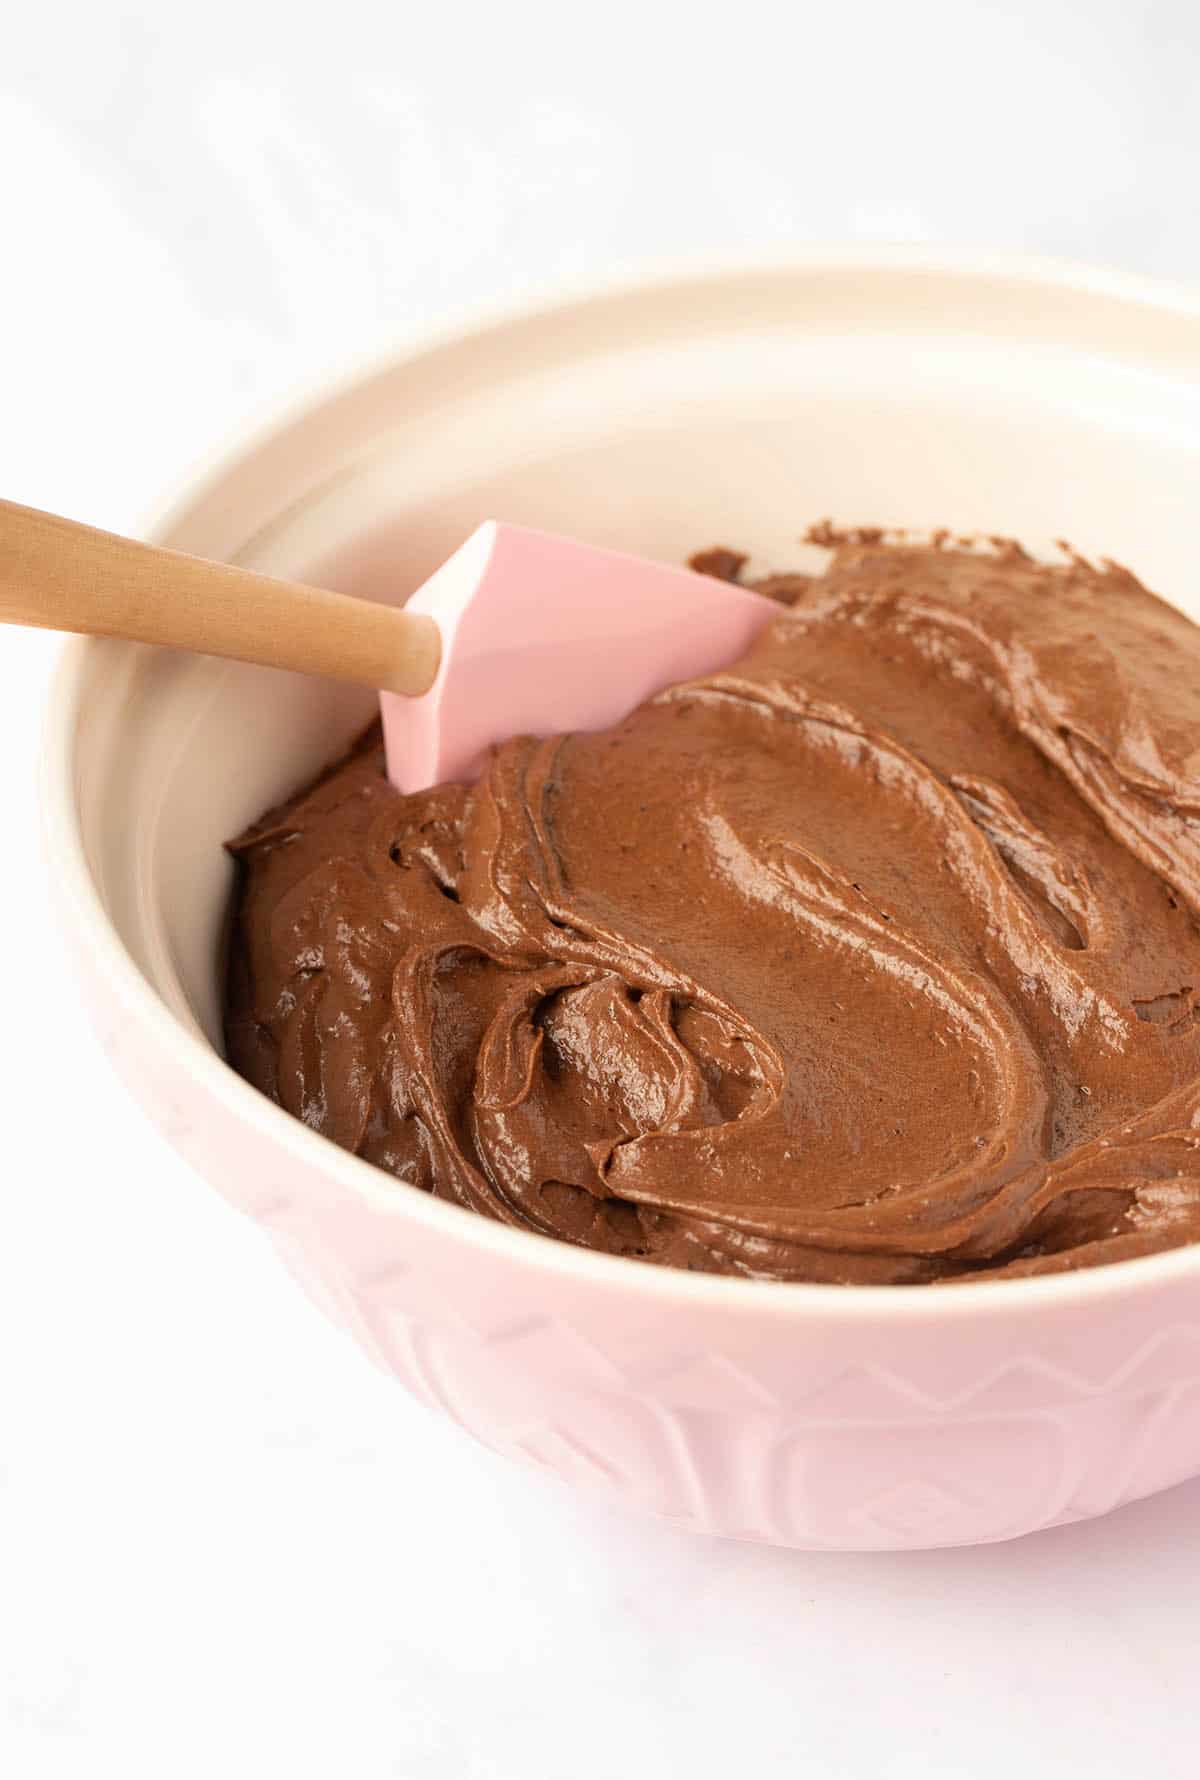 A pink mixing bowl filled with chocolate cake batter.